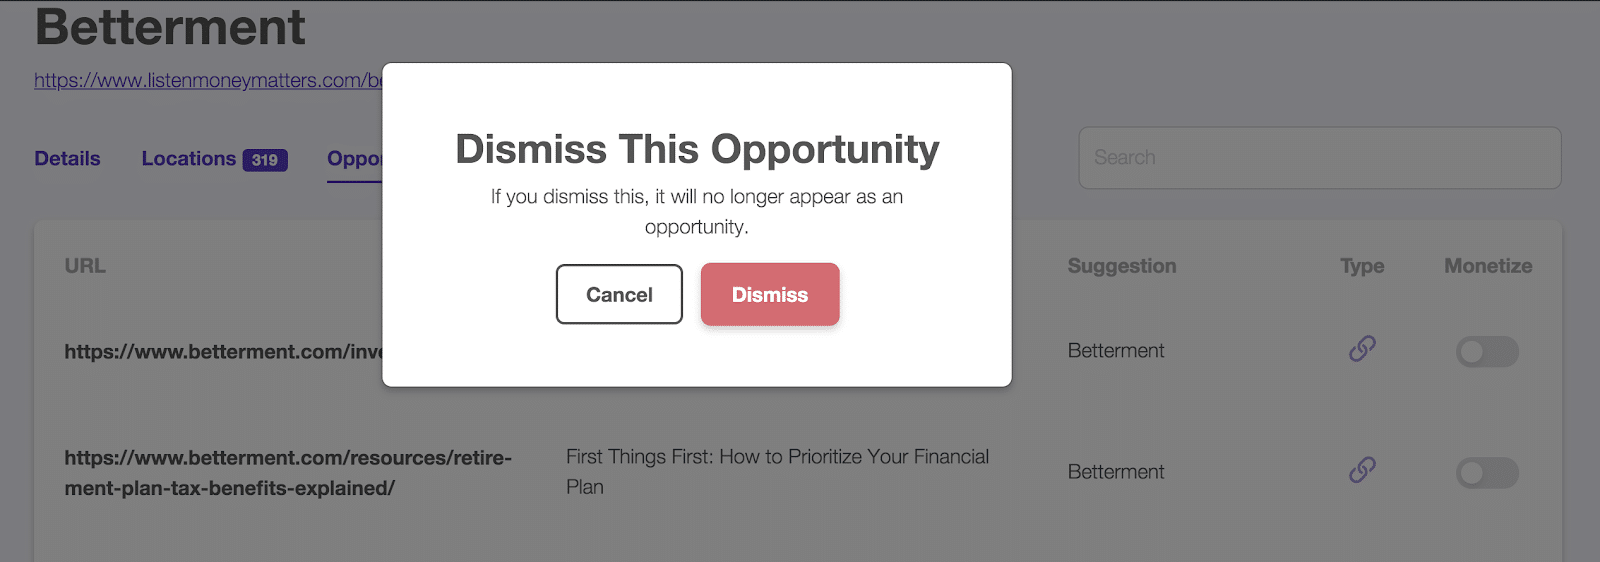 dismiss this opportunity screen display